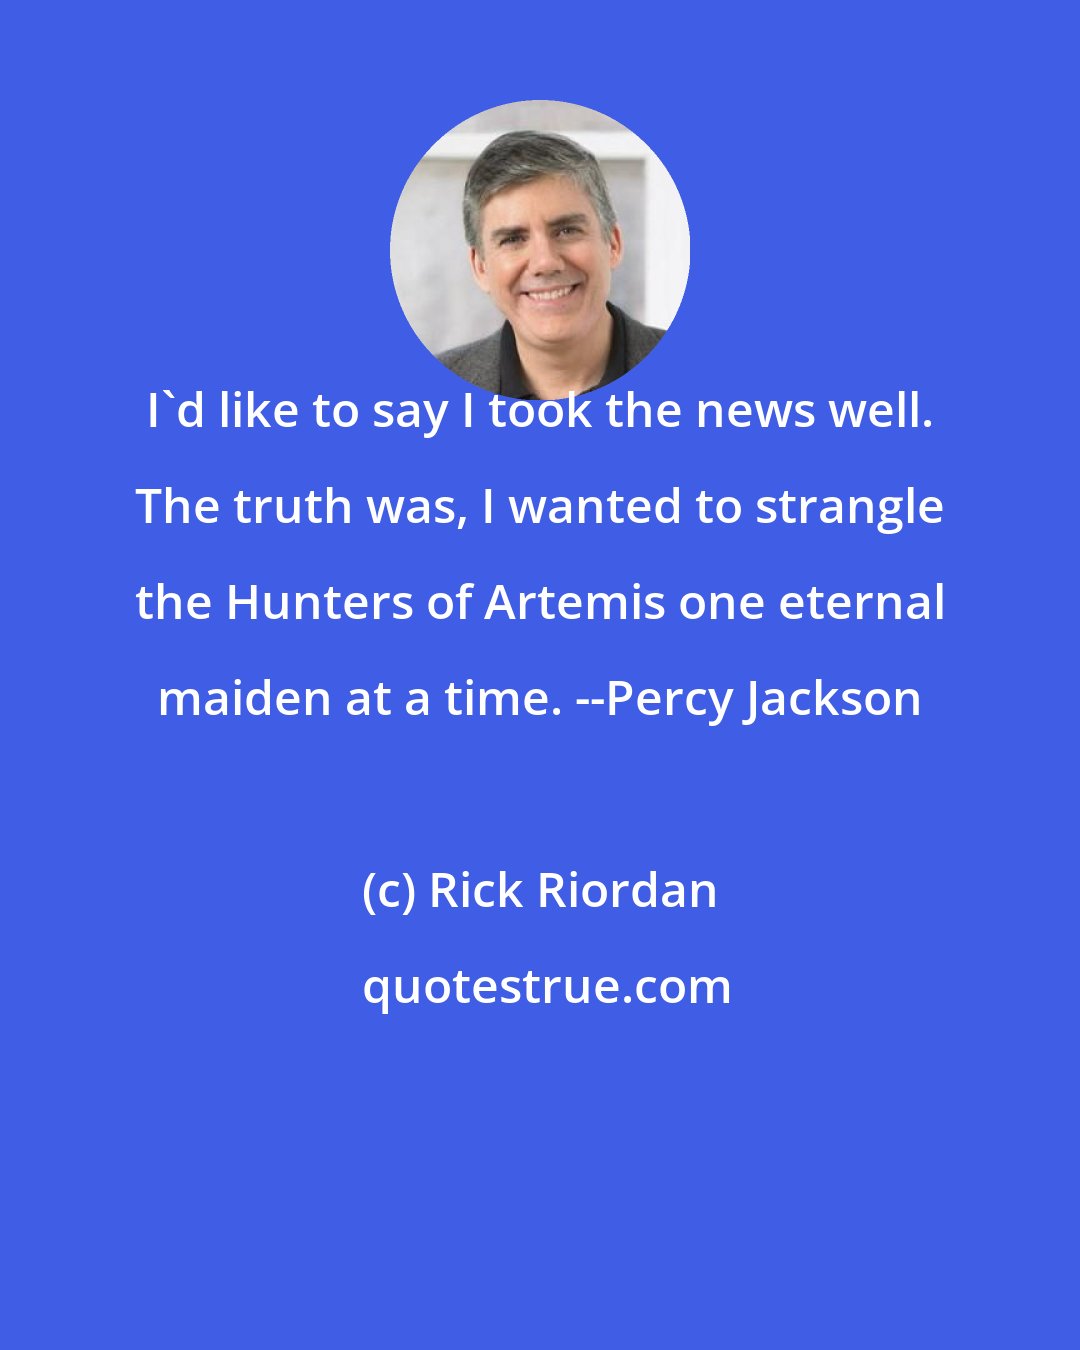 Rick Riordan: I'd like to say I took the news well. The truth was, I wanted to strangle the Hunters of Artemis one eternal maiden at a time. --Percy Jackson